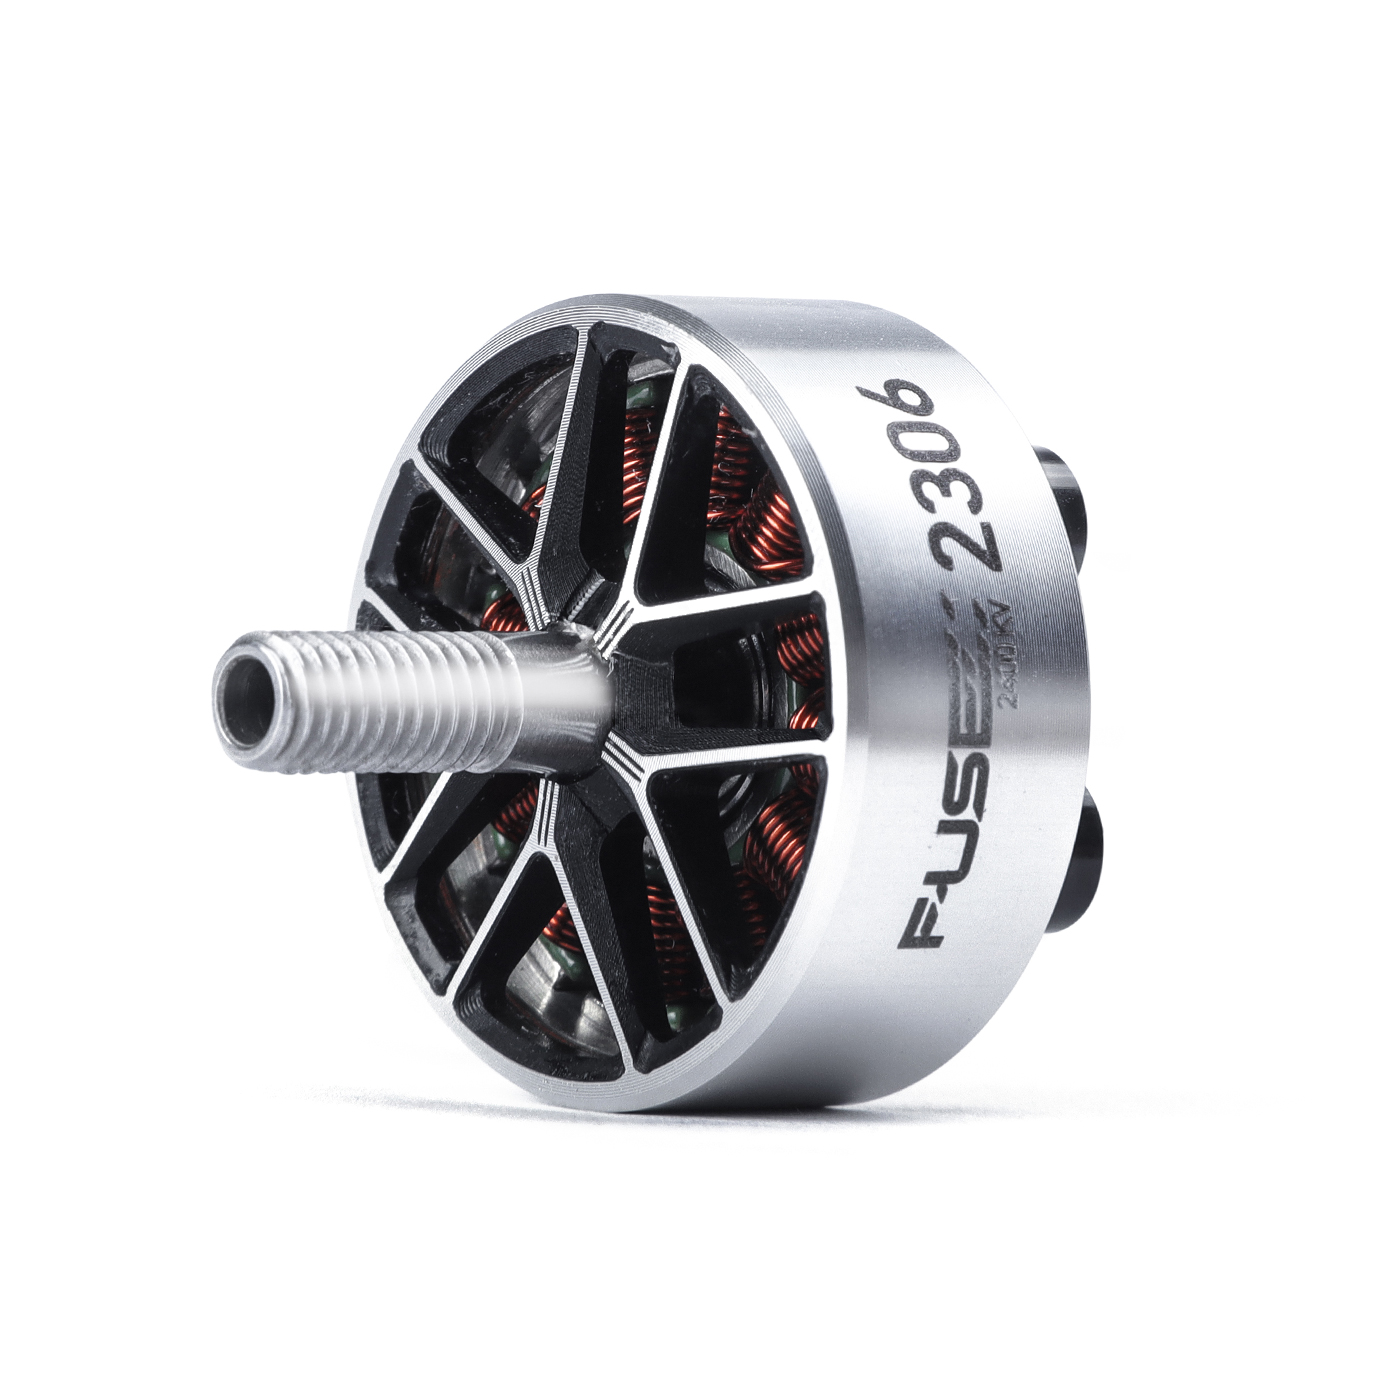 MAD  F-USE 2306 FPV RACING Brushless motor